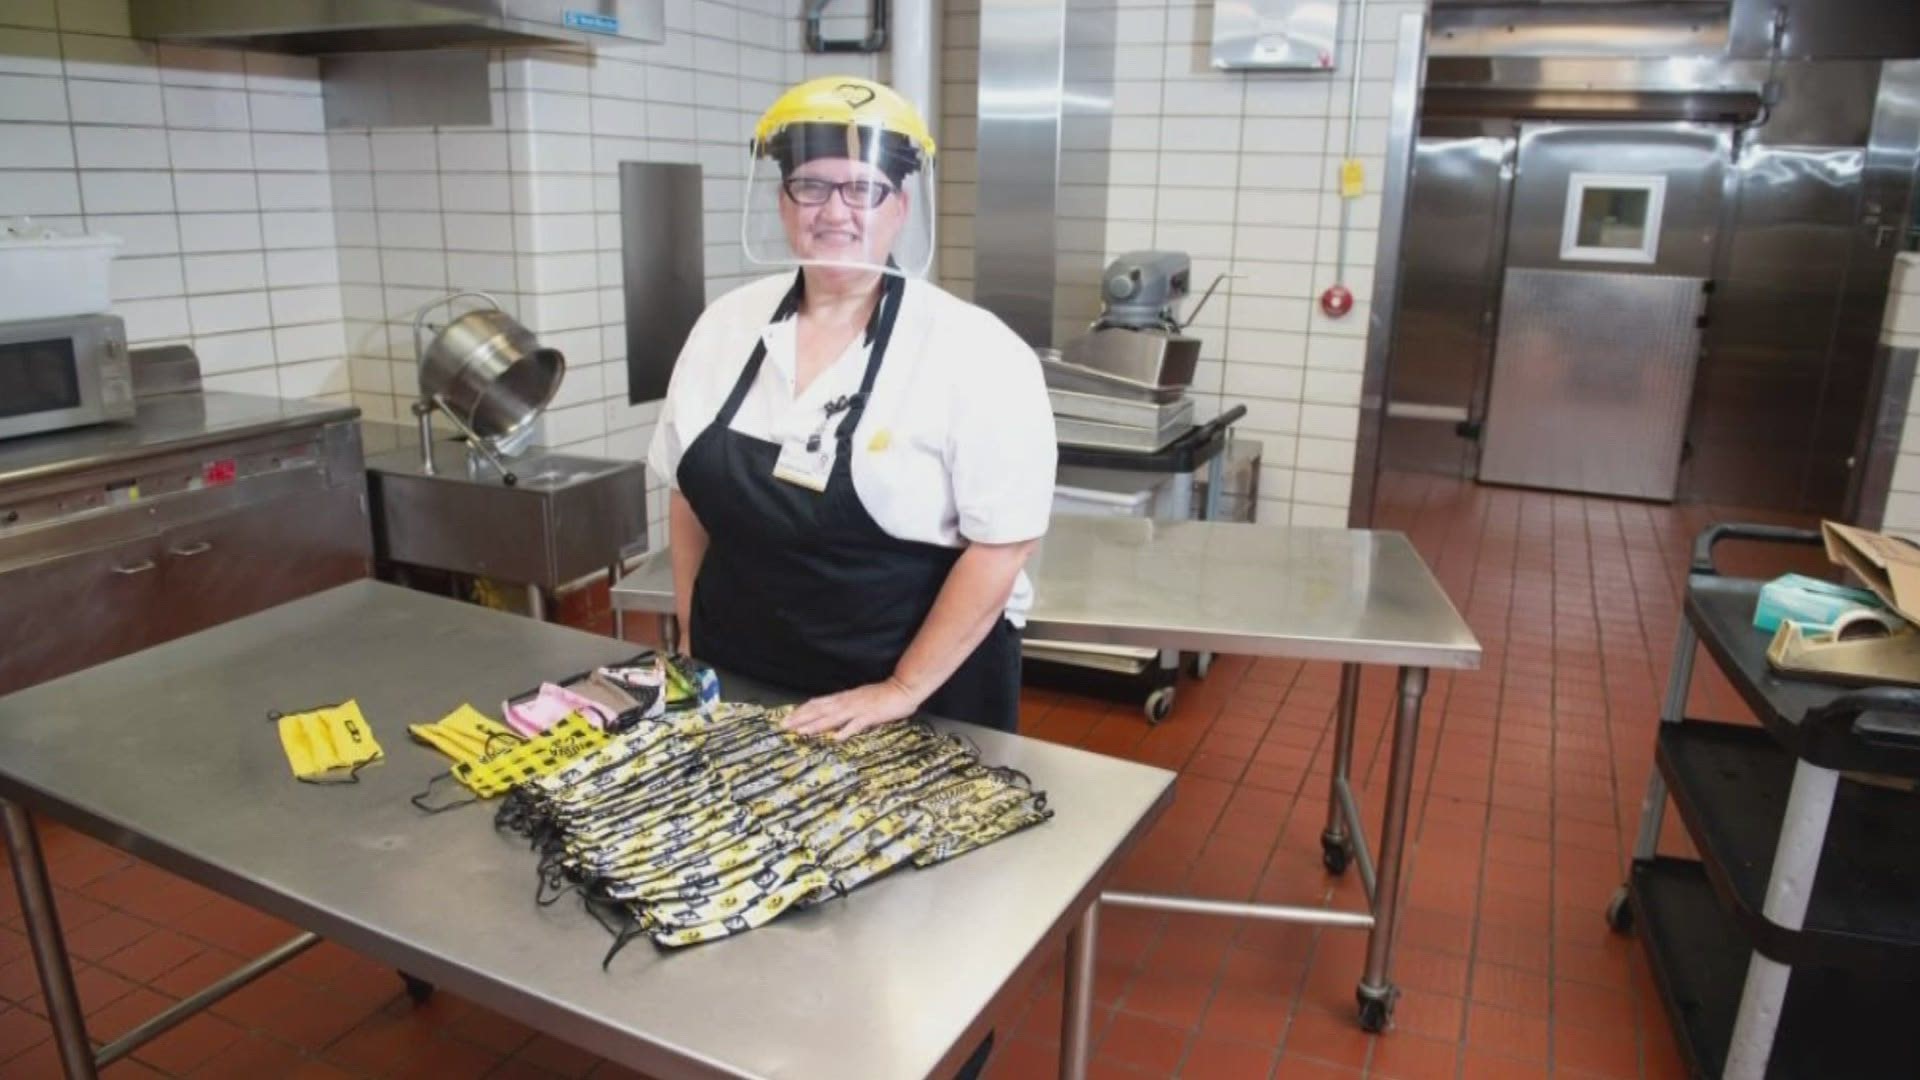 Elizabeth Jean Bennett has been sewing since she was four years old. Now, as a cook at the University of Iowa Hospital and Clinics, she's using that to give back.